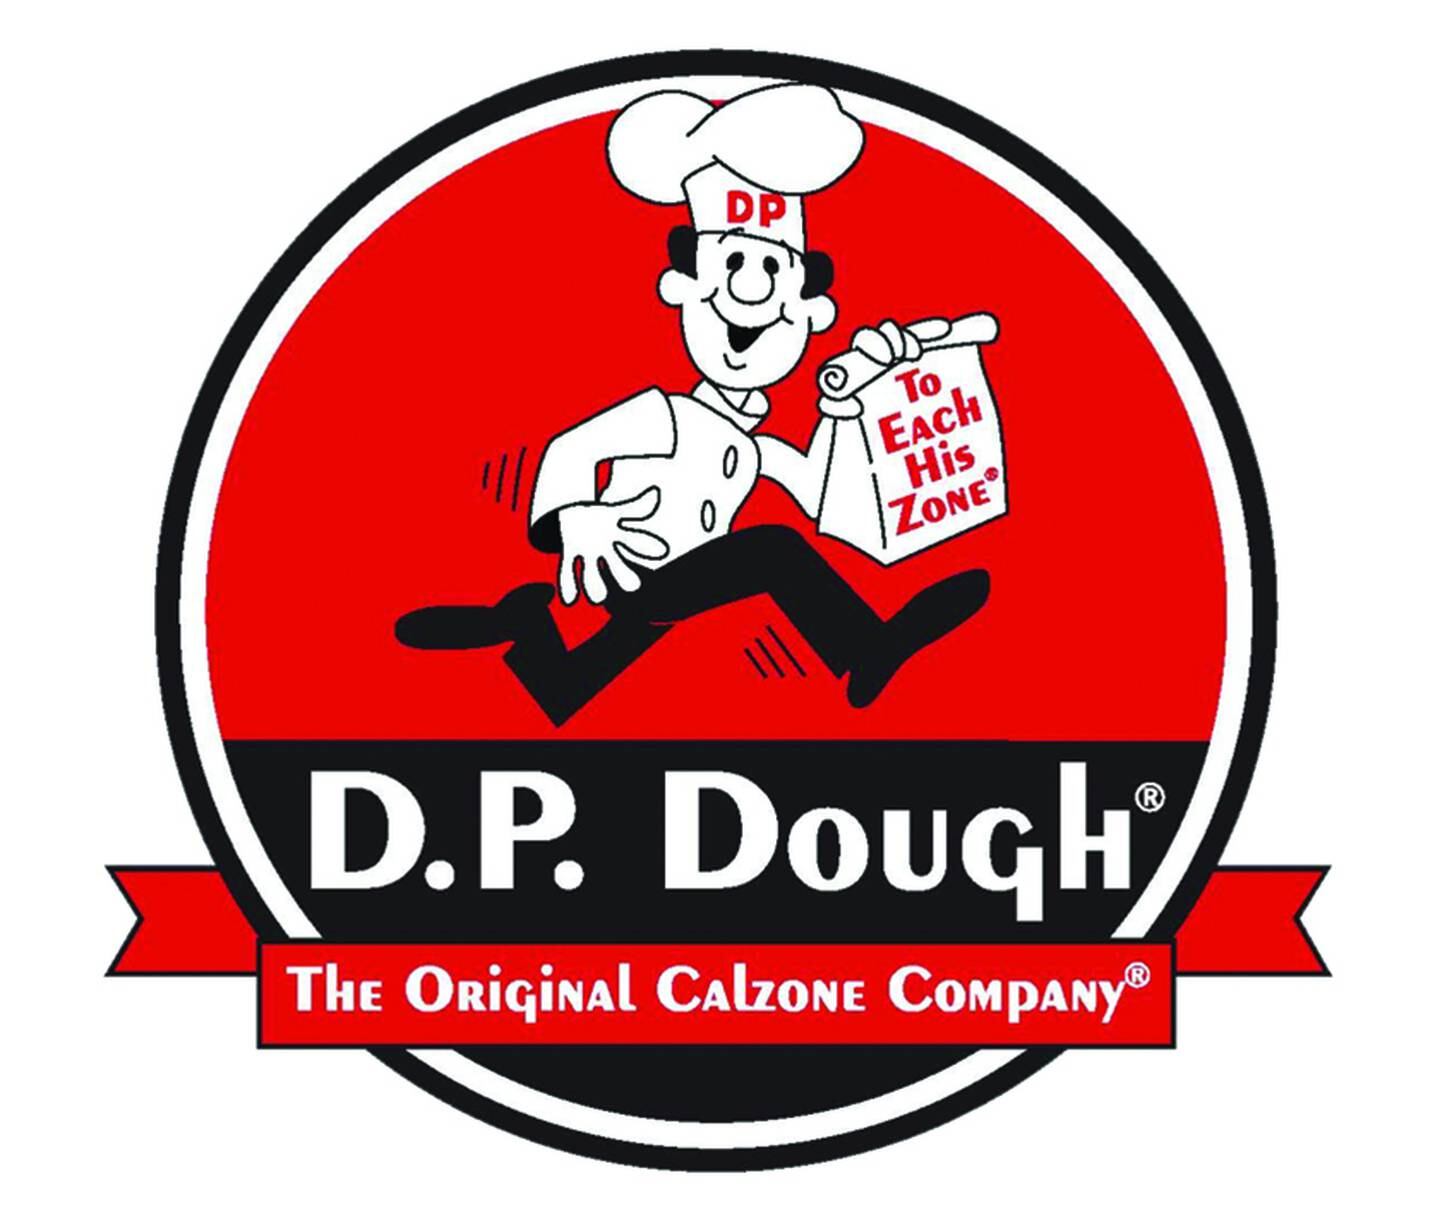 D.P. Dough is located at 215 W. Lincoln Hwy., DeKalb.